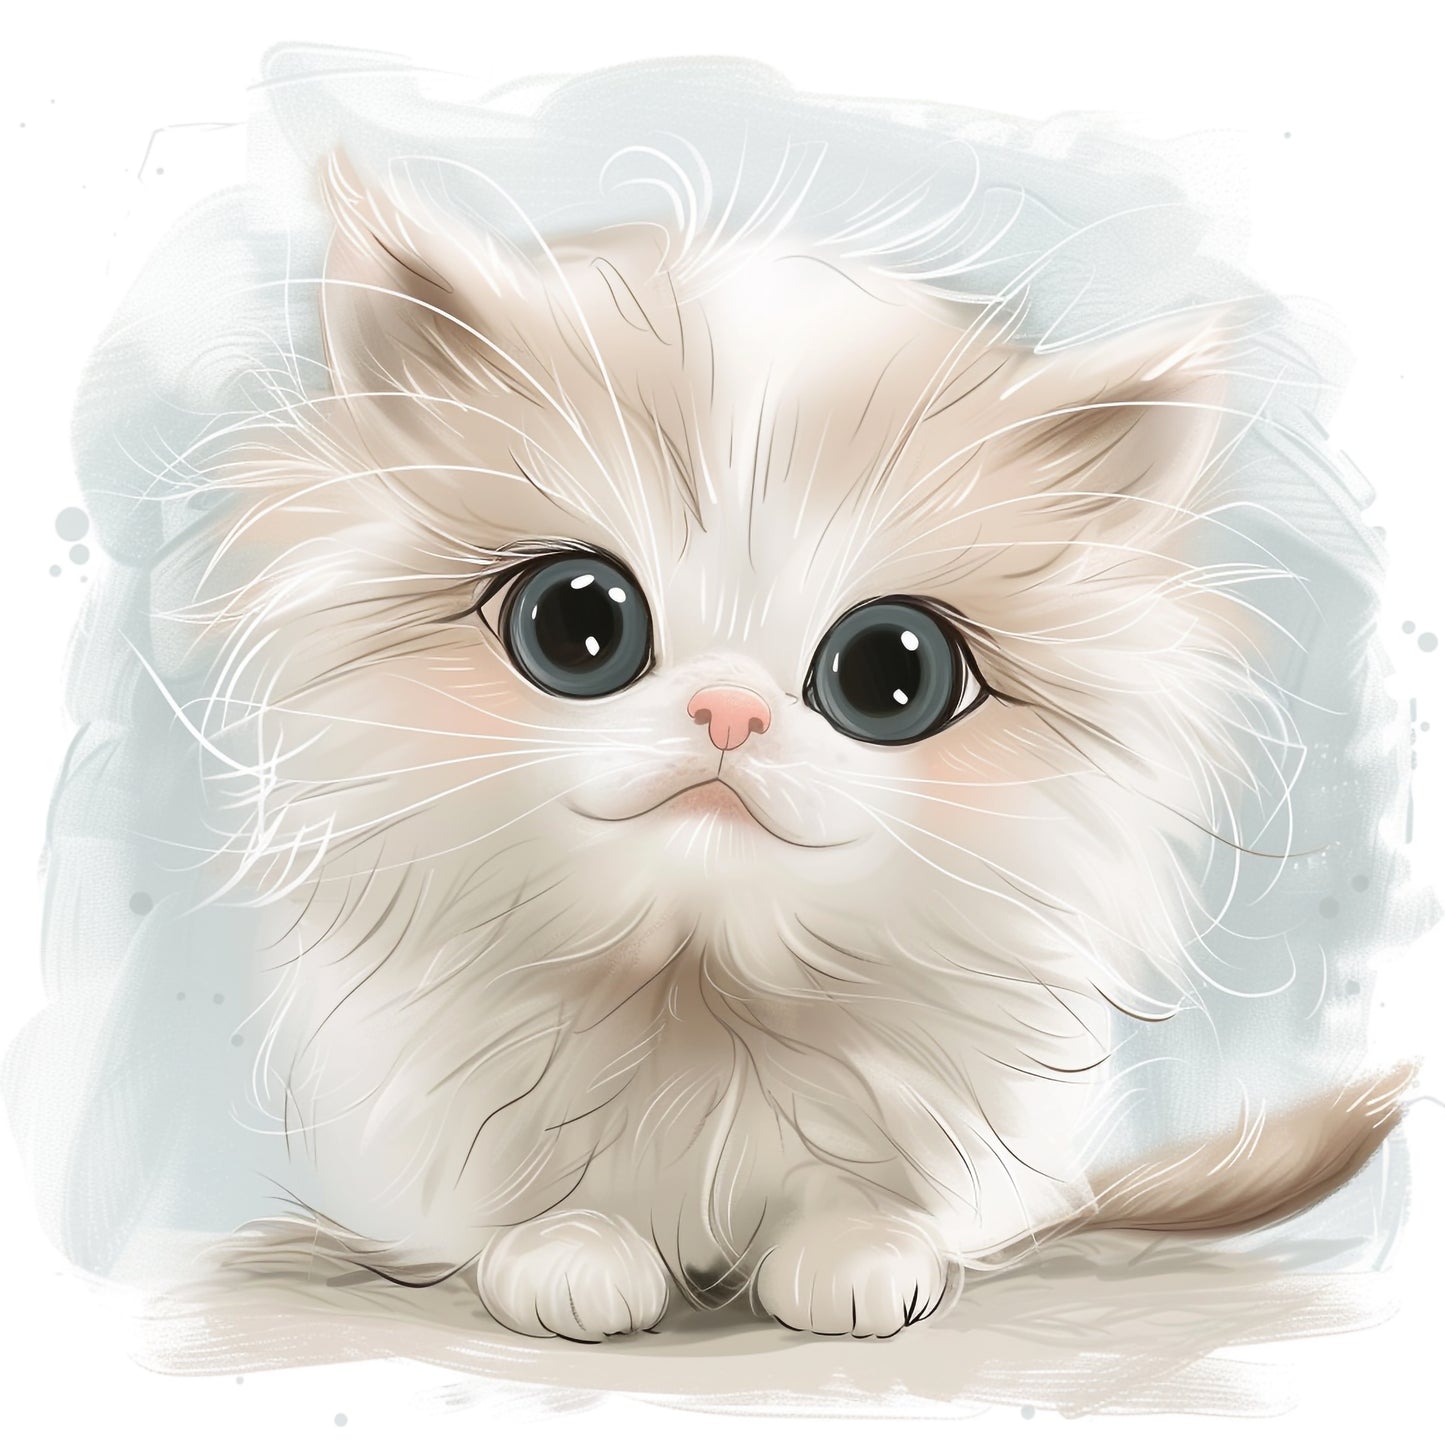 Adorable American Curl Kitten with Big Eyes Illustrated